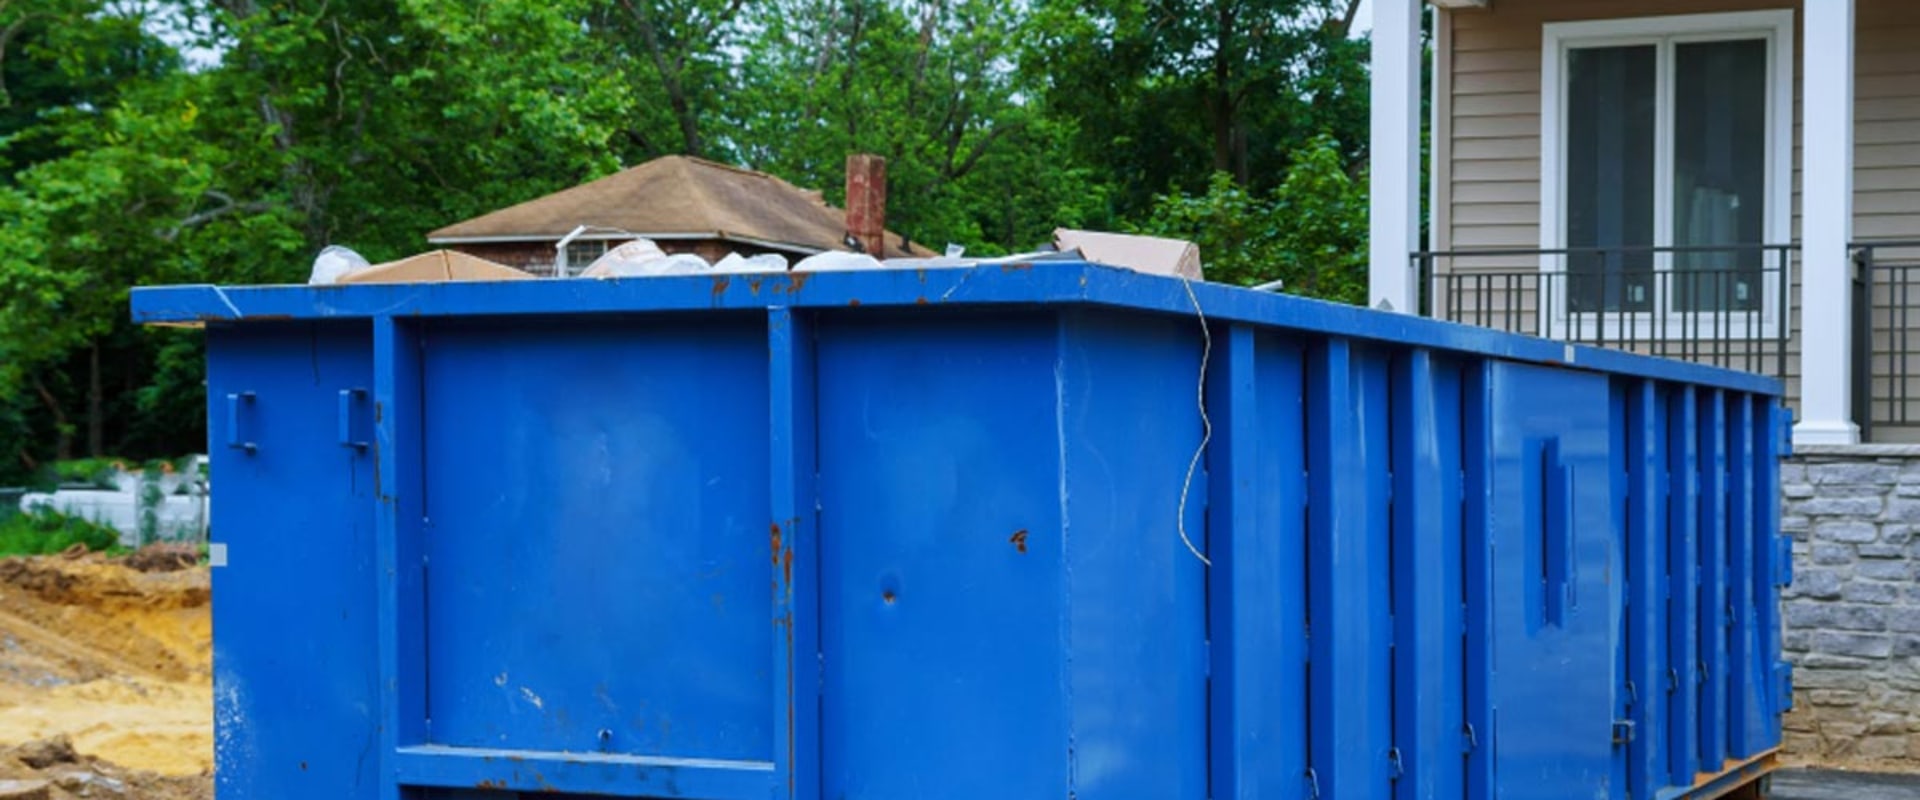 The Advantages Of Renting A Dumpster Removal Service To Handle Waste After A Home Remodel In Boise, Idaho